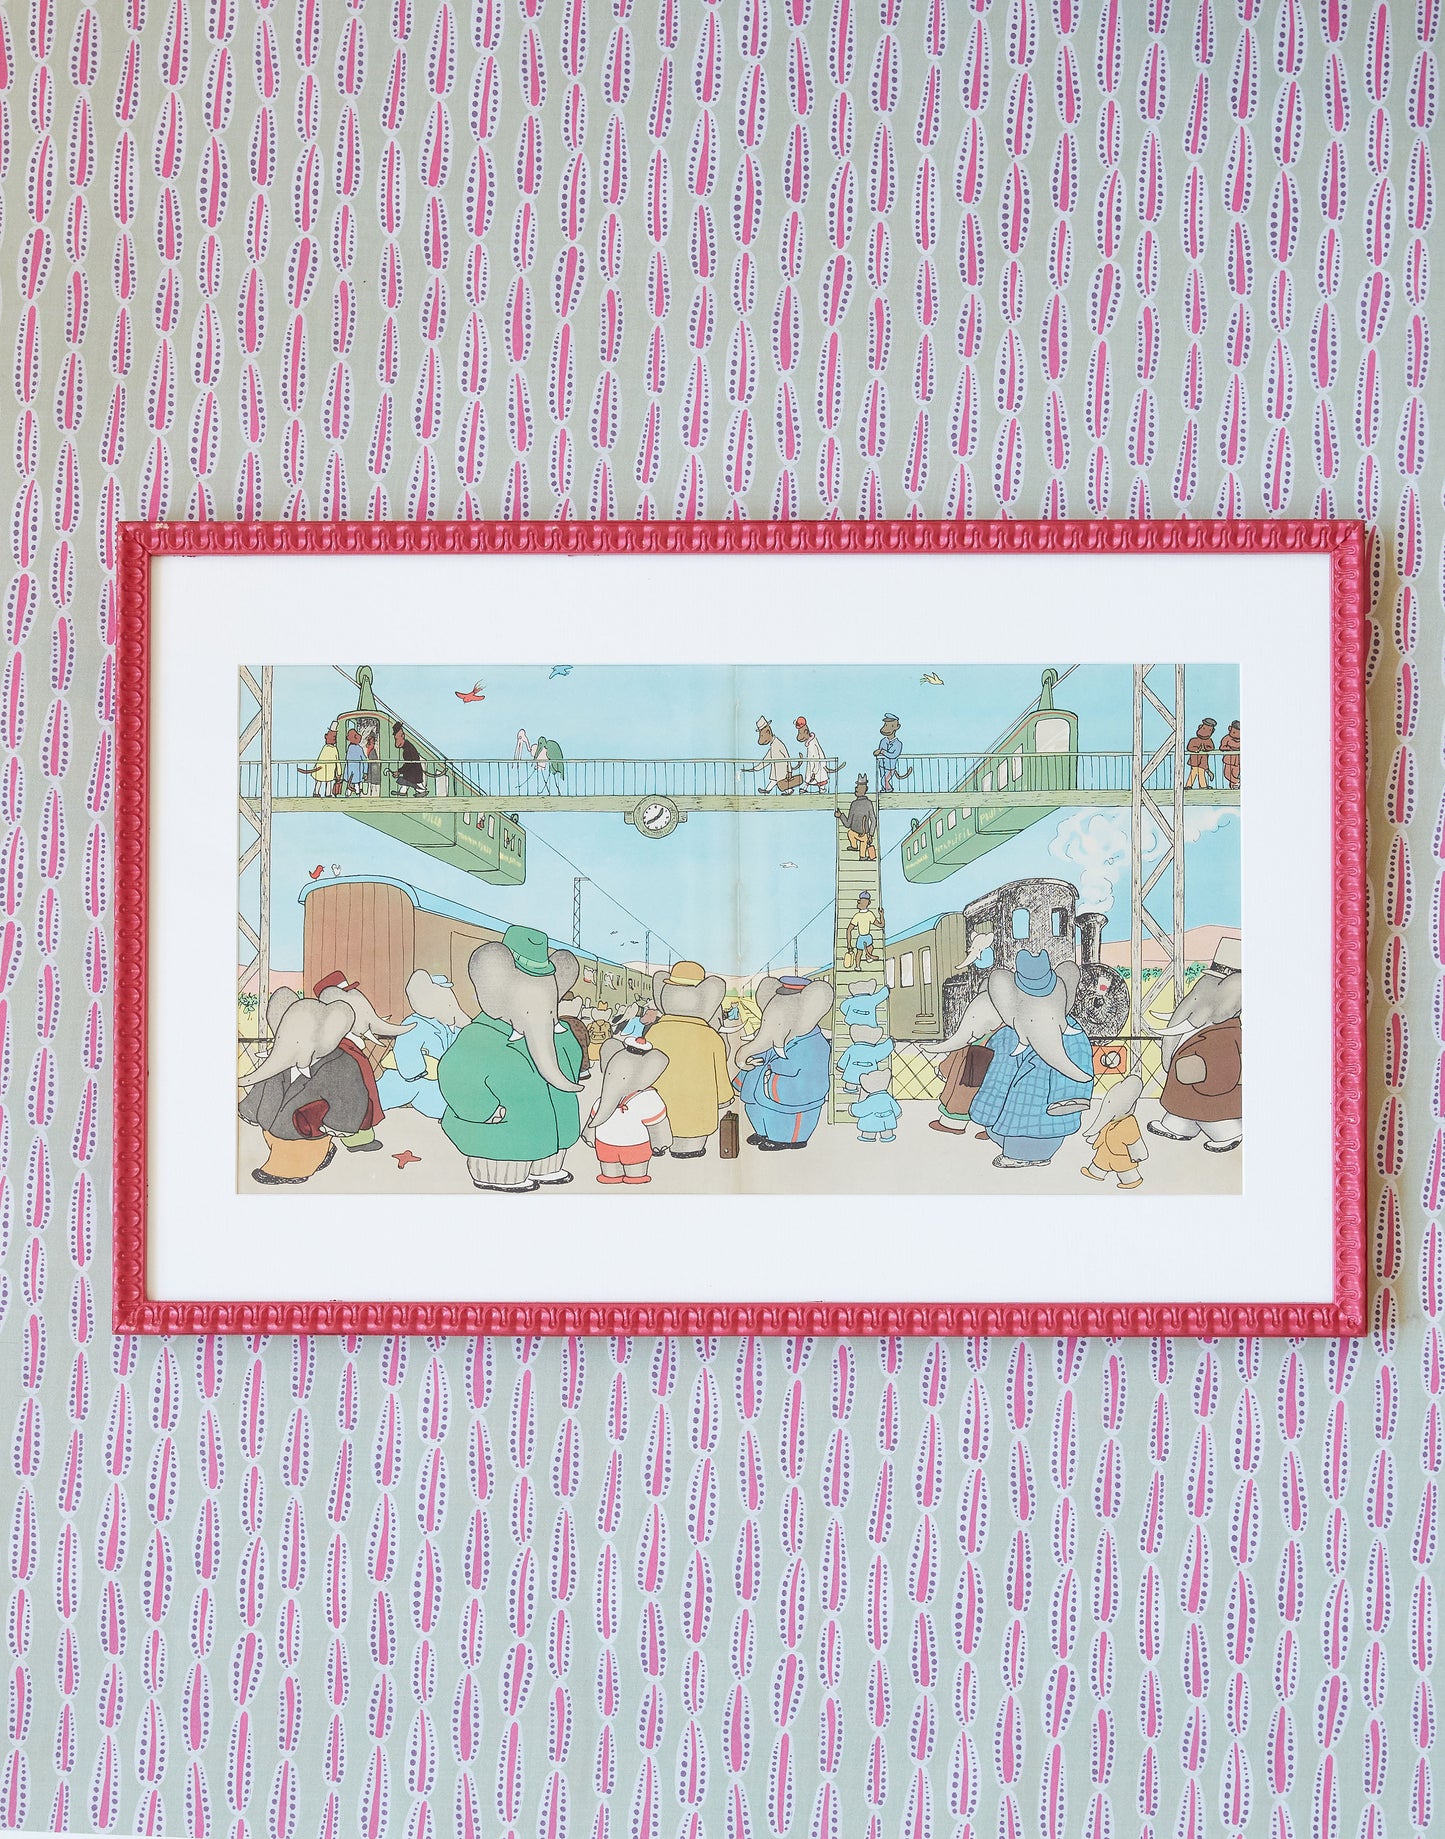 A Set of Four Lithographs From Babar's Travels by Jean de Brunhoff circa 1940s